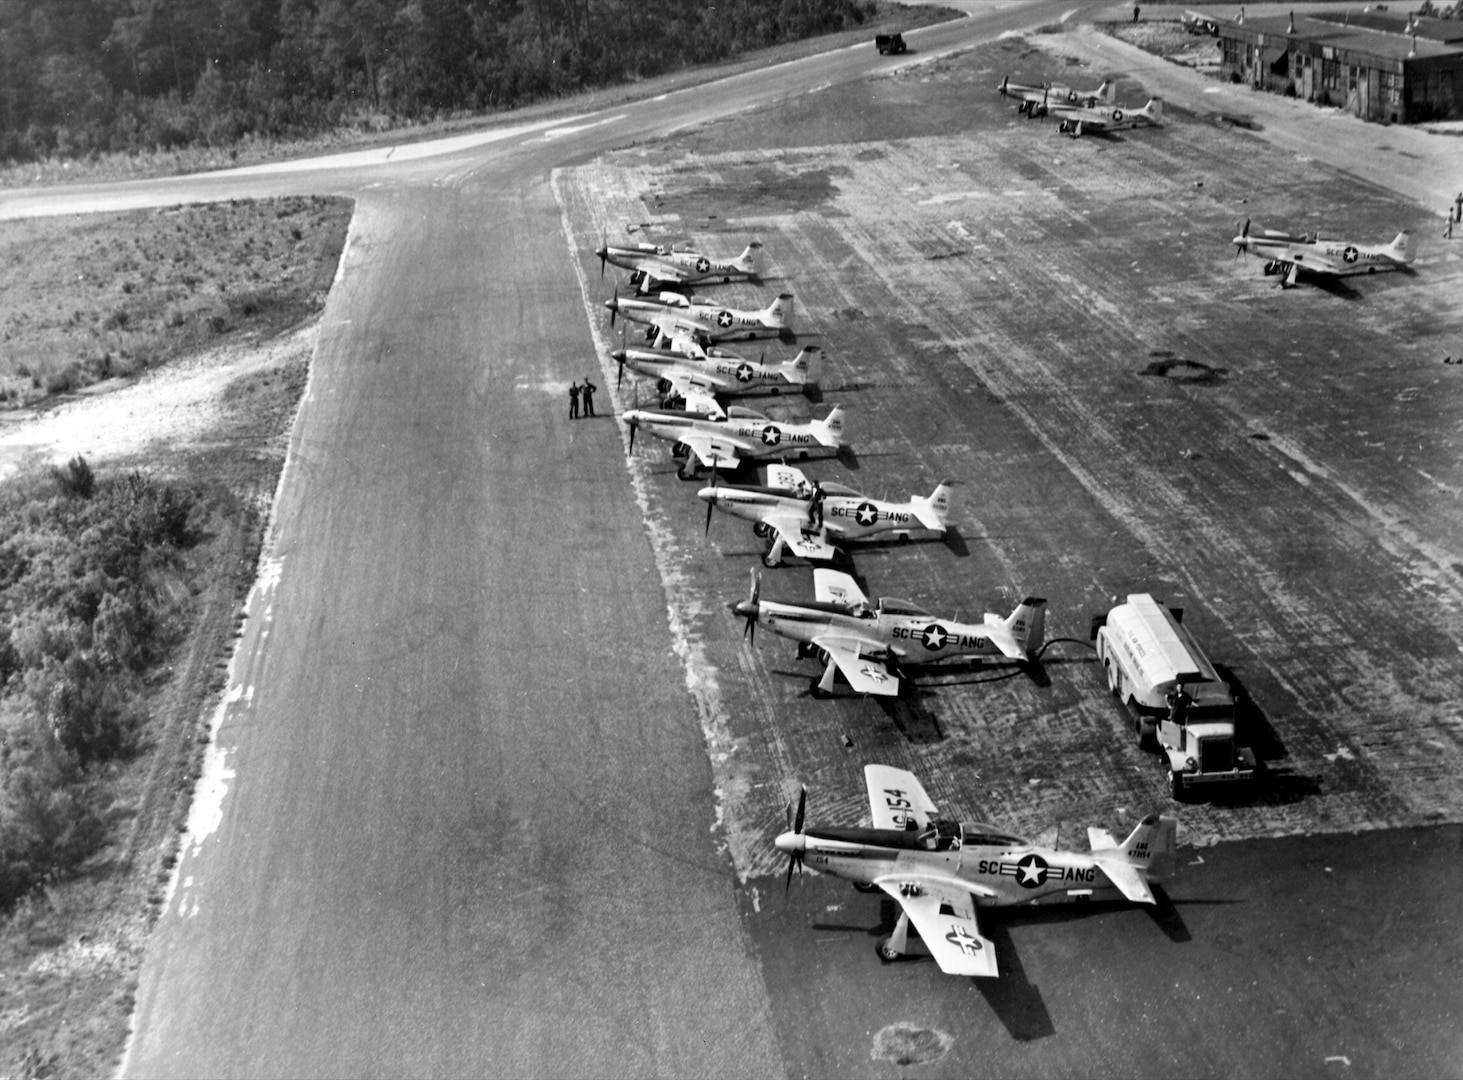 South Carolina Air National Guard planes shown 74 years ago, when the SCANG was formed, Dec. 9, 1946.